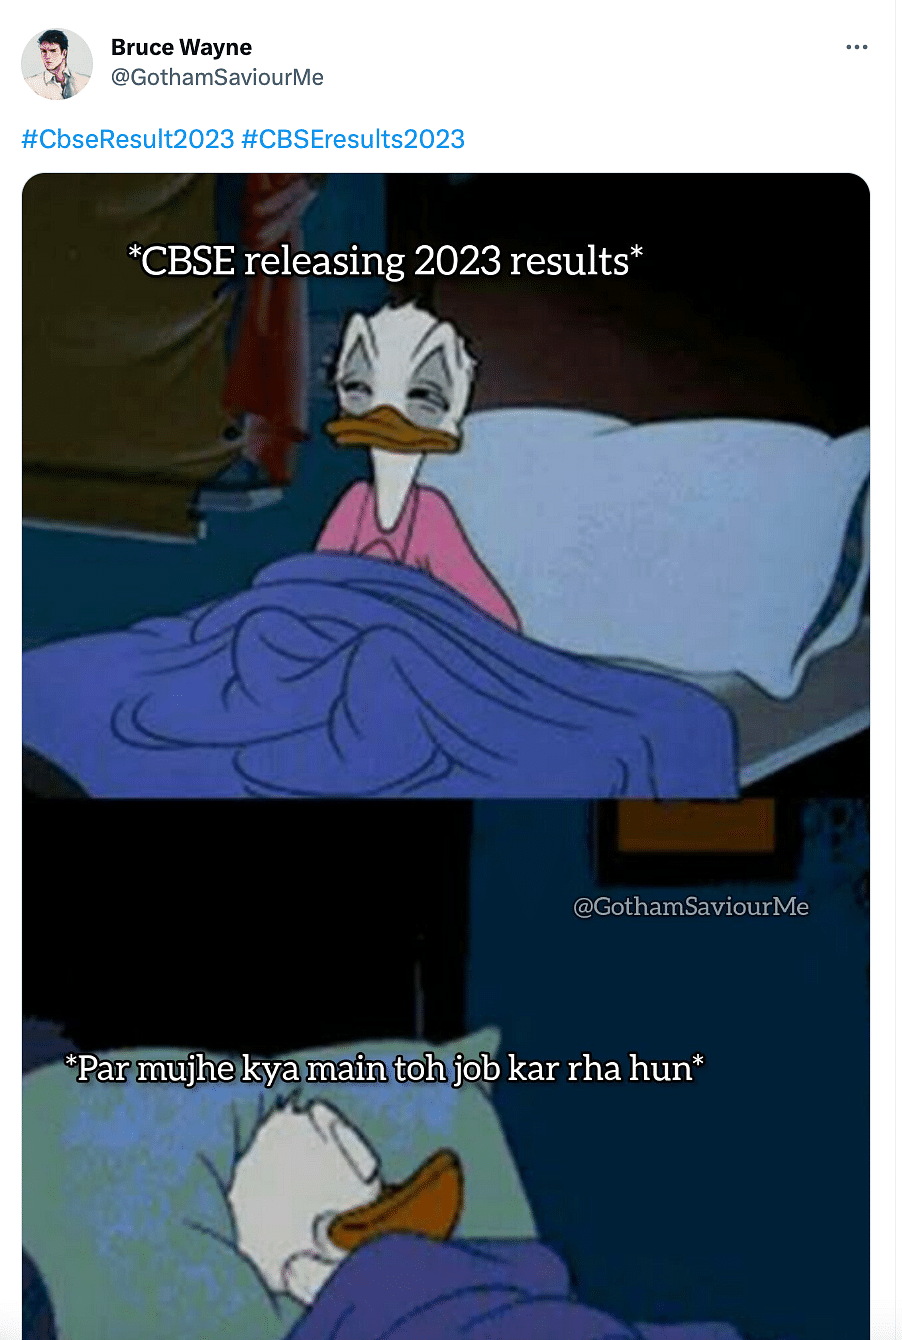 The long nervous wait for class 10th and 12th is finally over as CBSE declared the board results earlier today. 